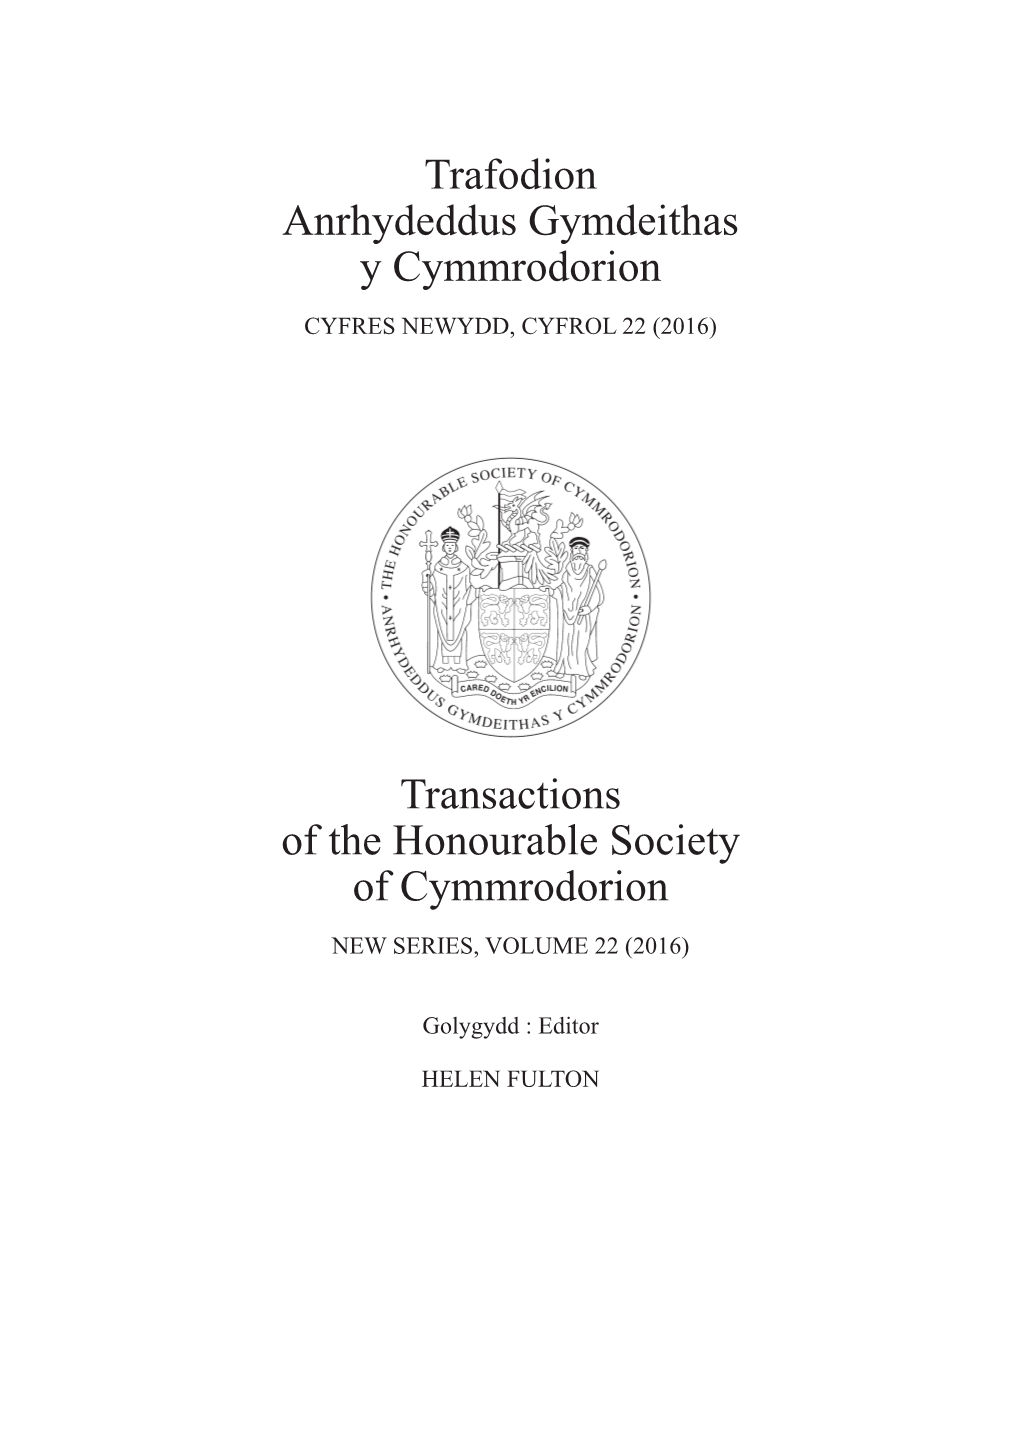 Trafodion Anrhydeddus Gymdeithas Y Cymmrodorion Transactions of the Honourable Society of Cymmrodorion